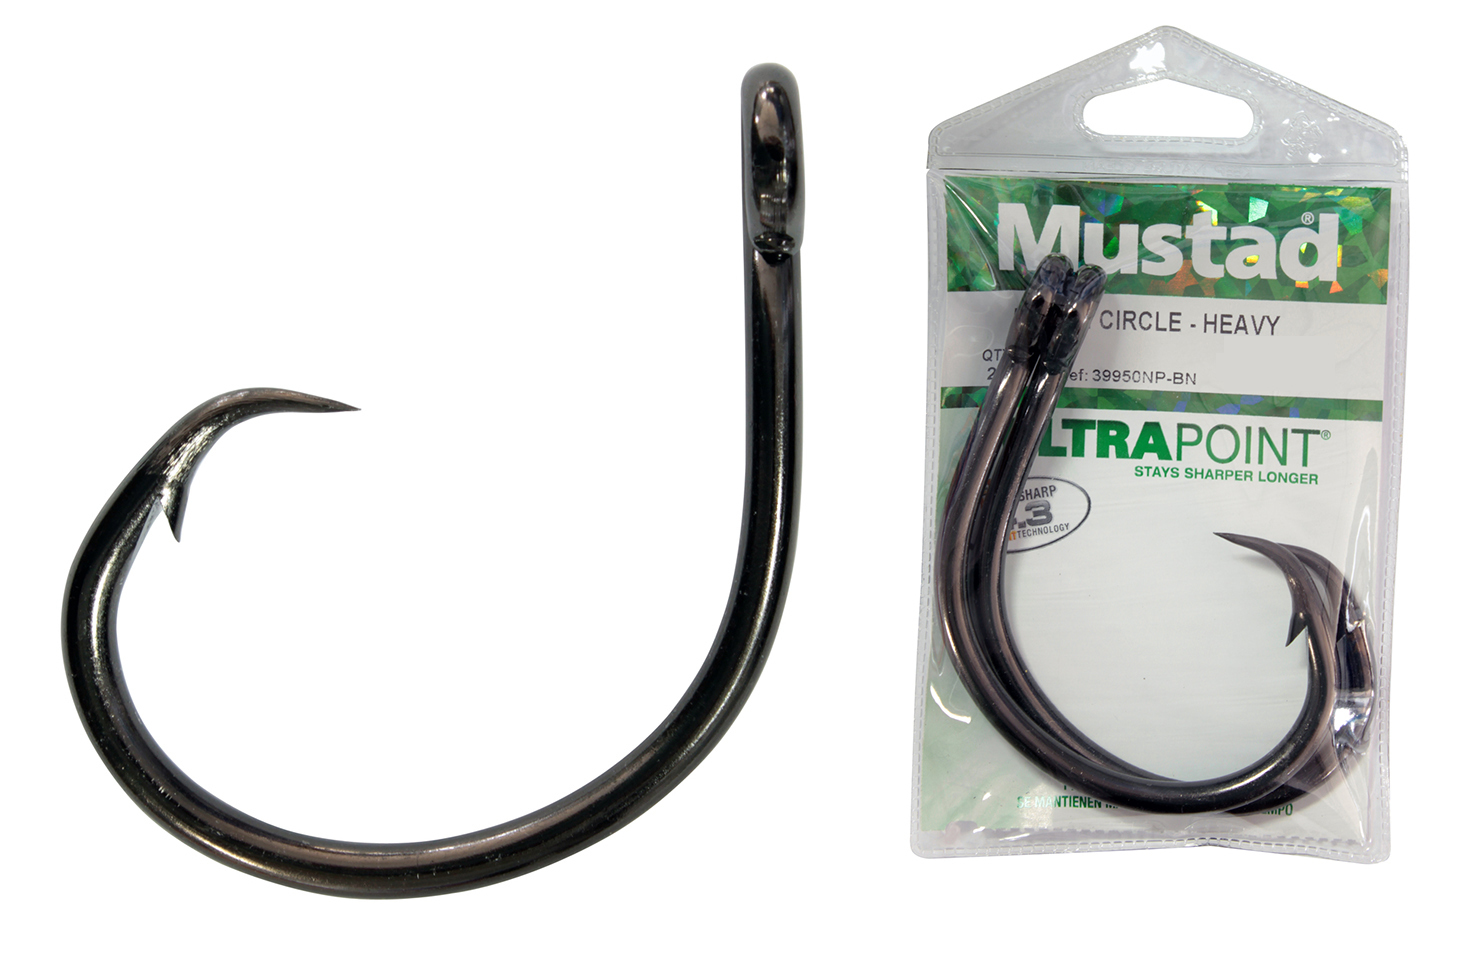 1000 Mustad 5/0 Demon perfect Circle Hook Ultrapoint 39950NP-BL 3X Live Bait 